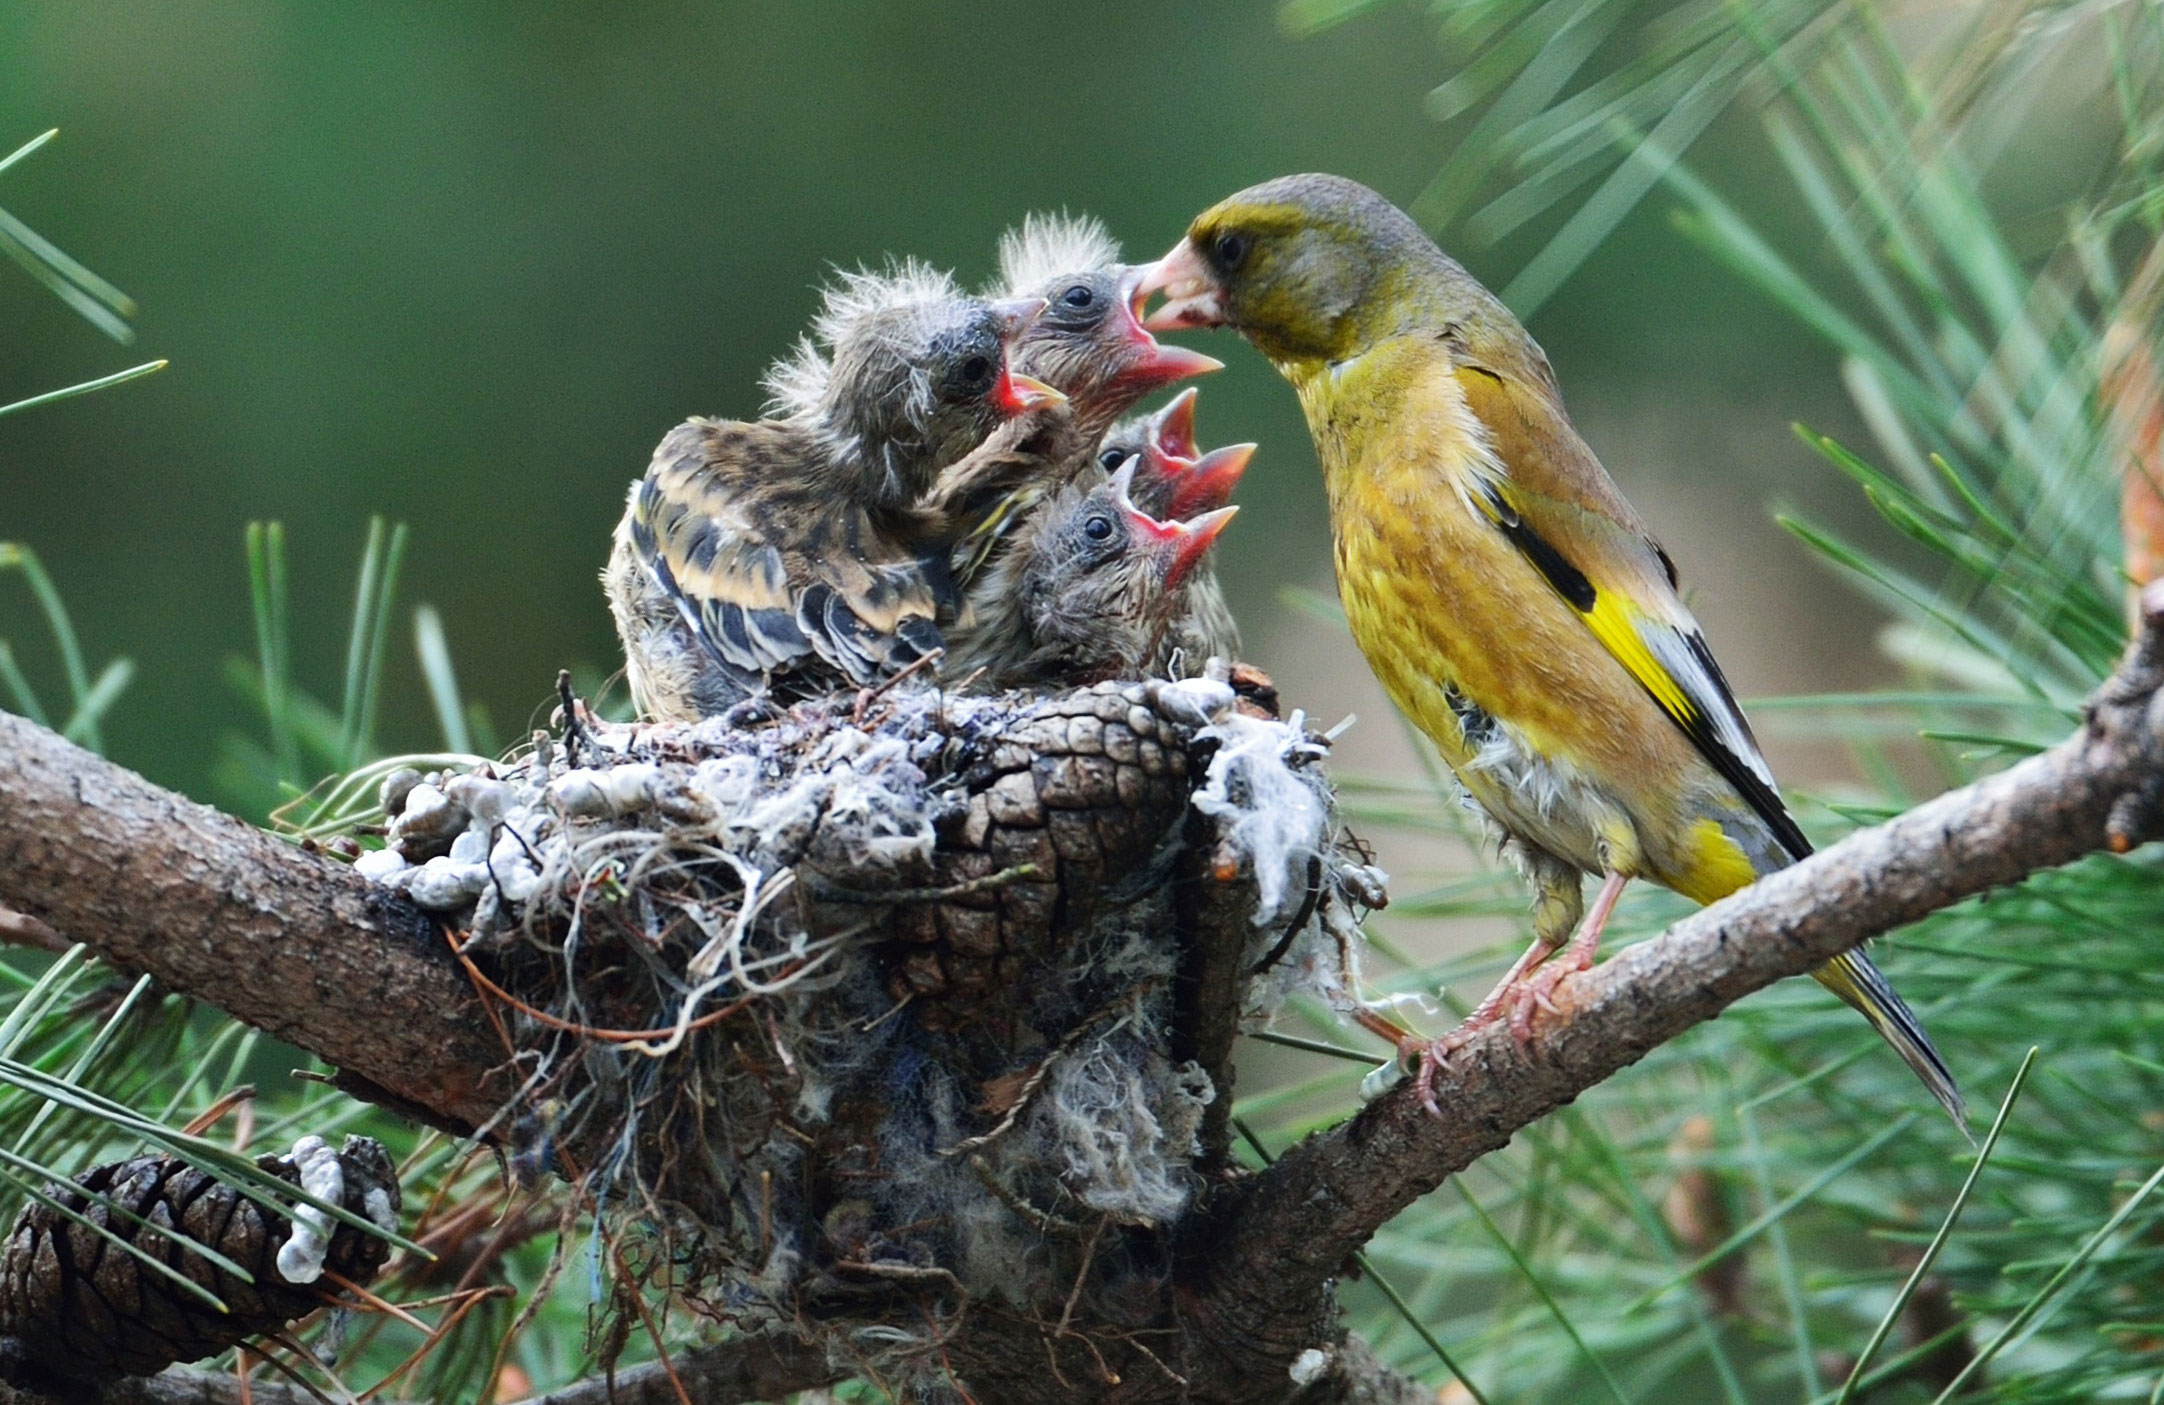 A goldfinch feeds its newly hatched chicks in their nest in Chungju, North Chungcheong Province, South Korea, April 2, 2014.